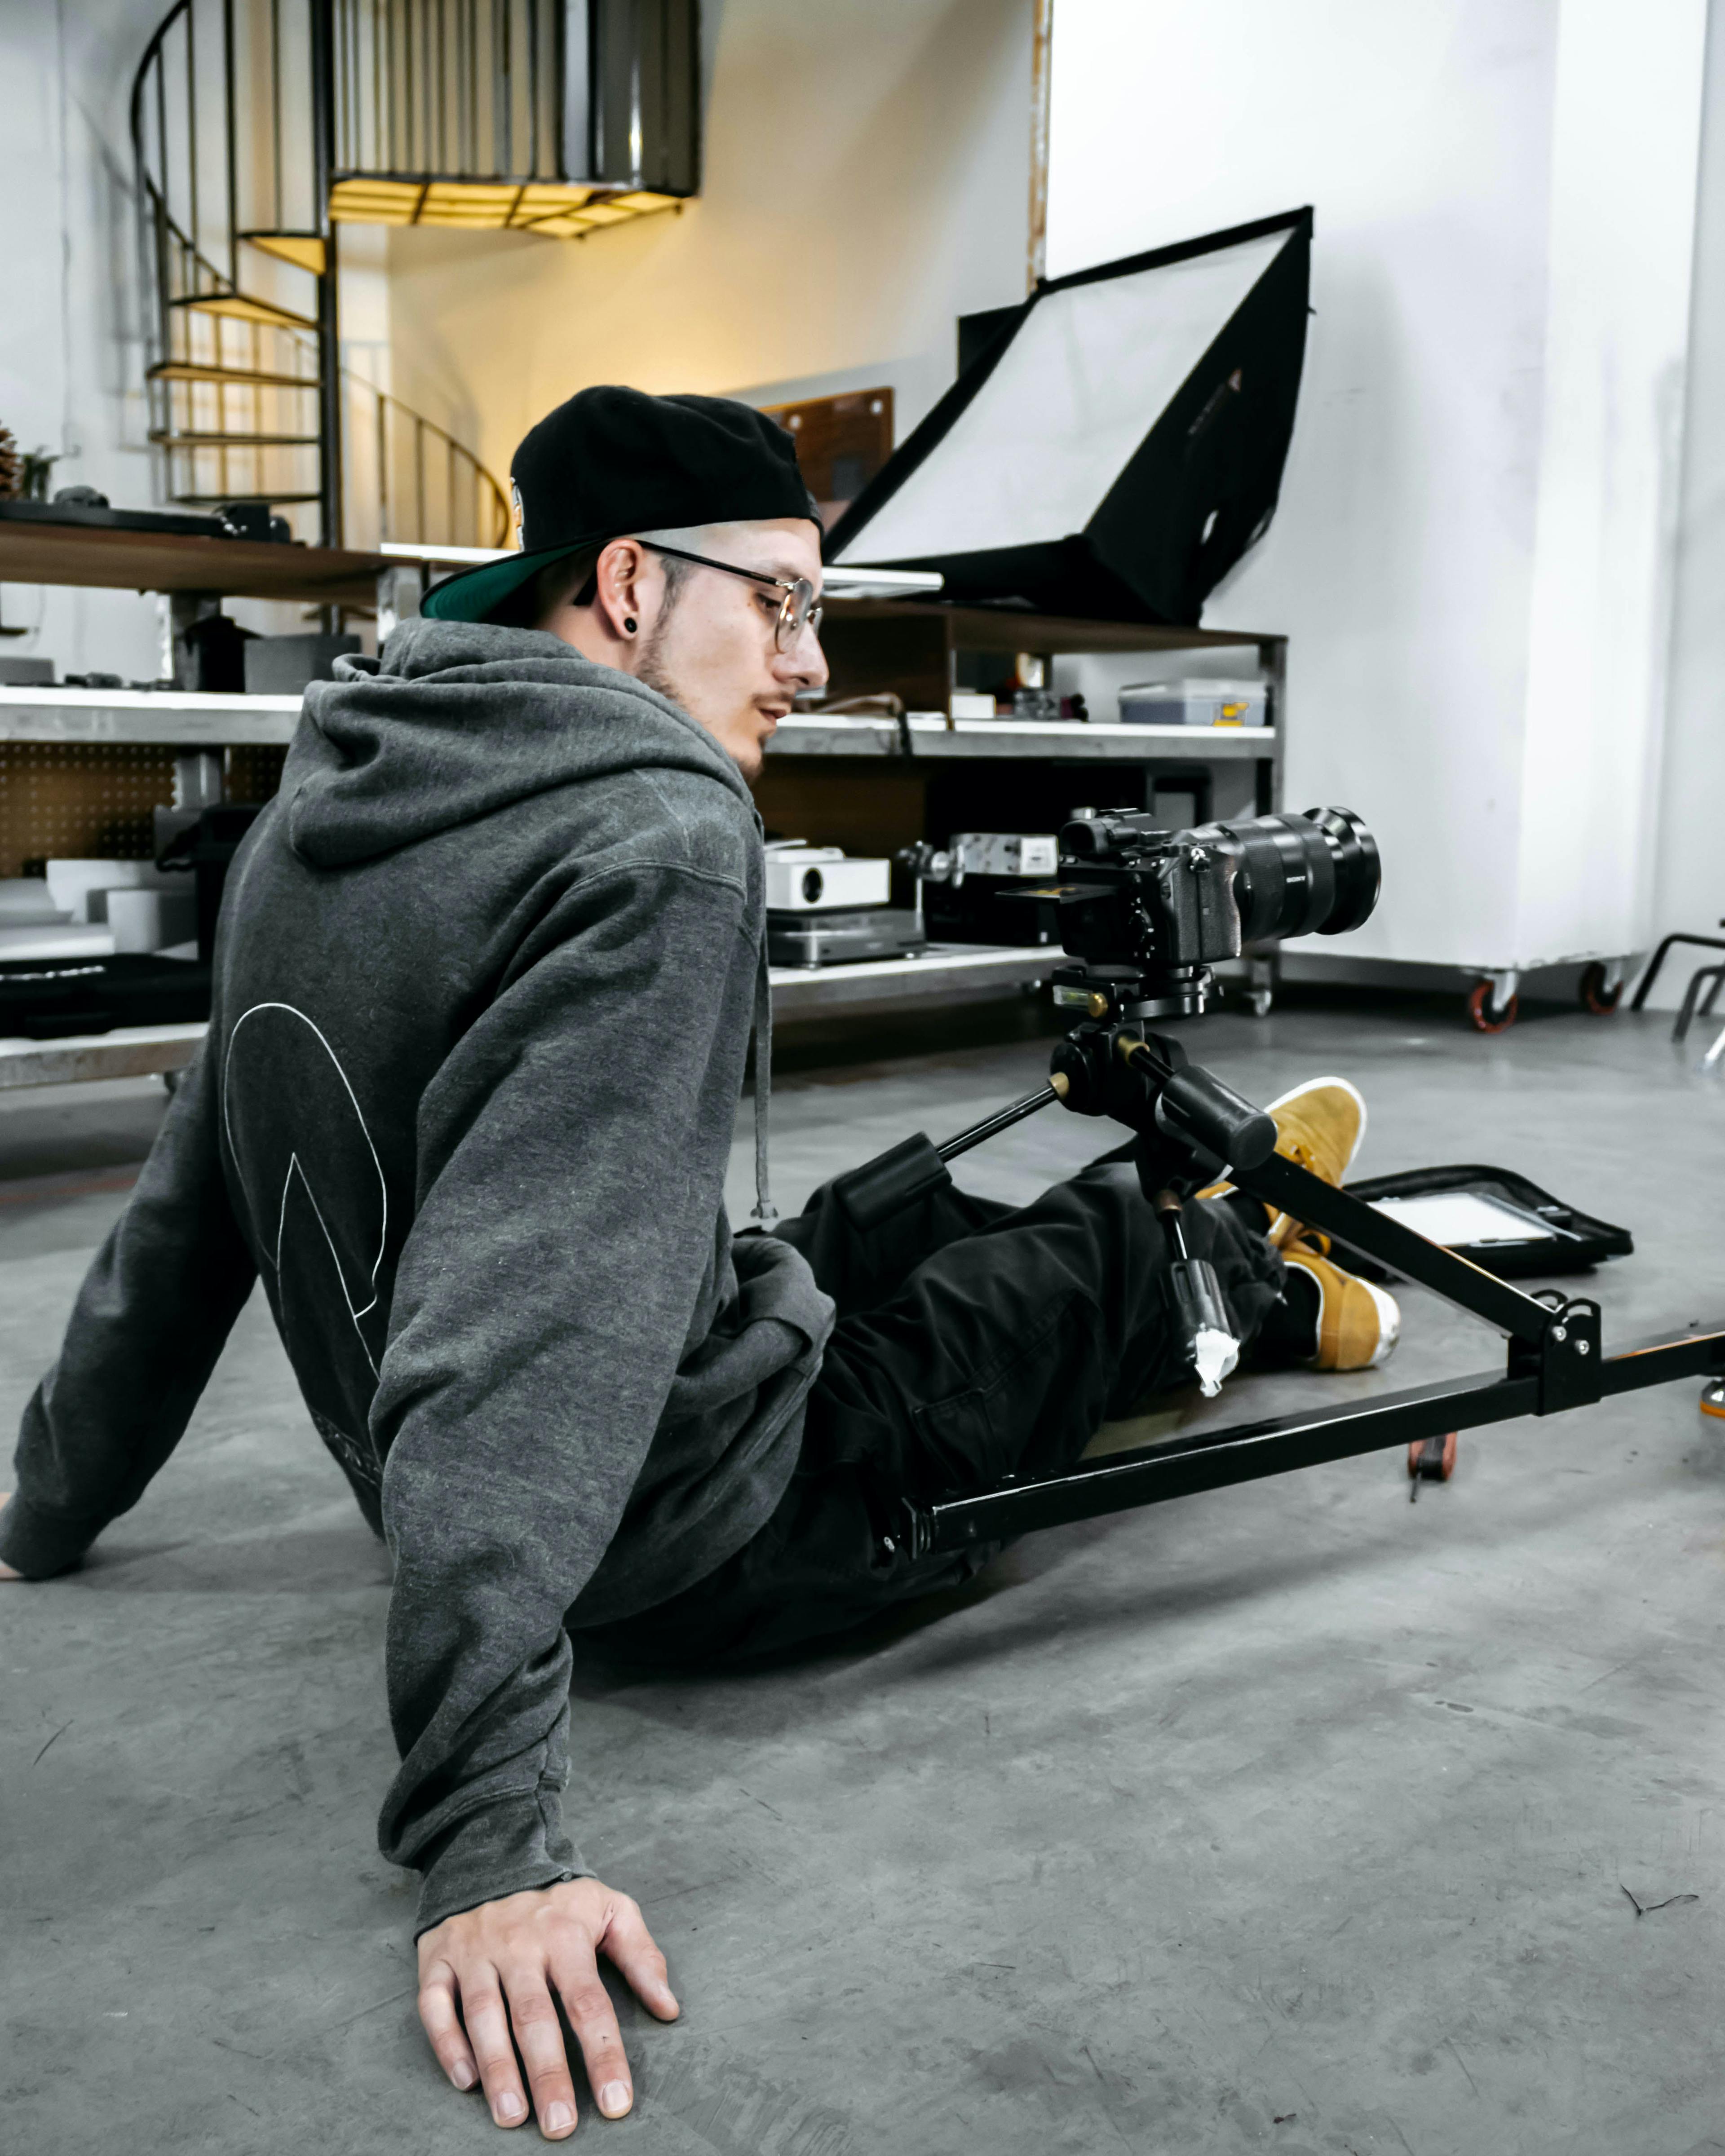 Photographer carefully adjusting the camera on a 360 rig, a tripod-like device that enables capturing images from all angles, in a photography studio.